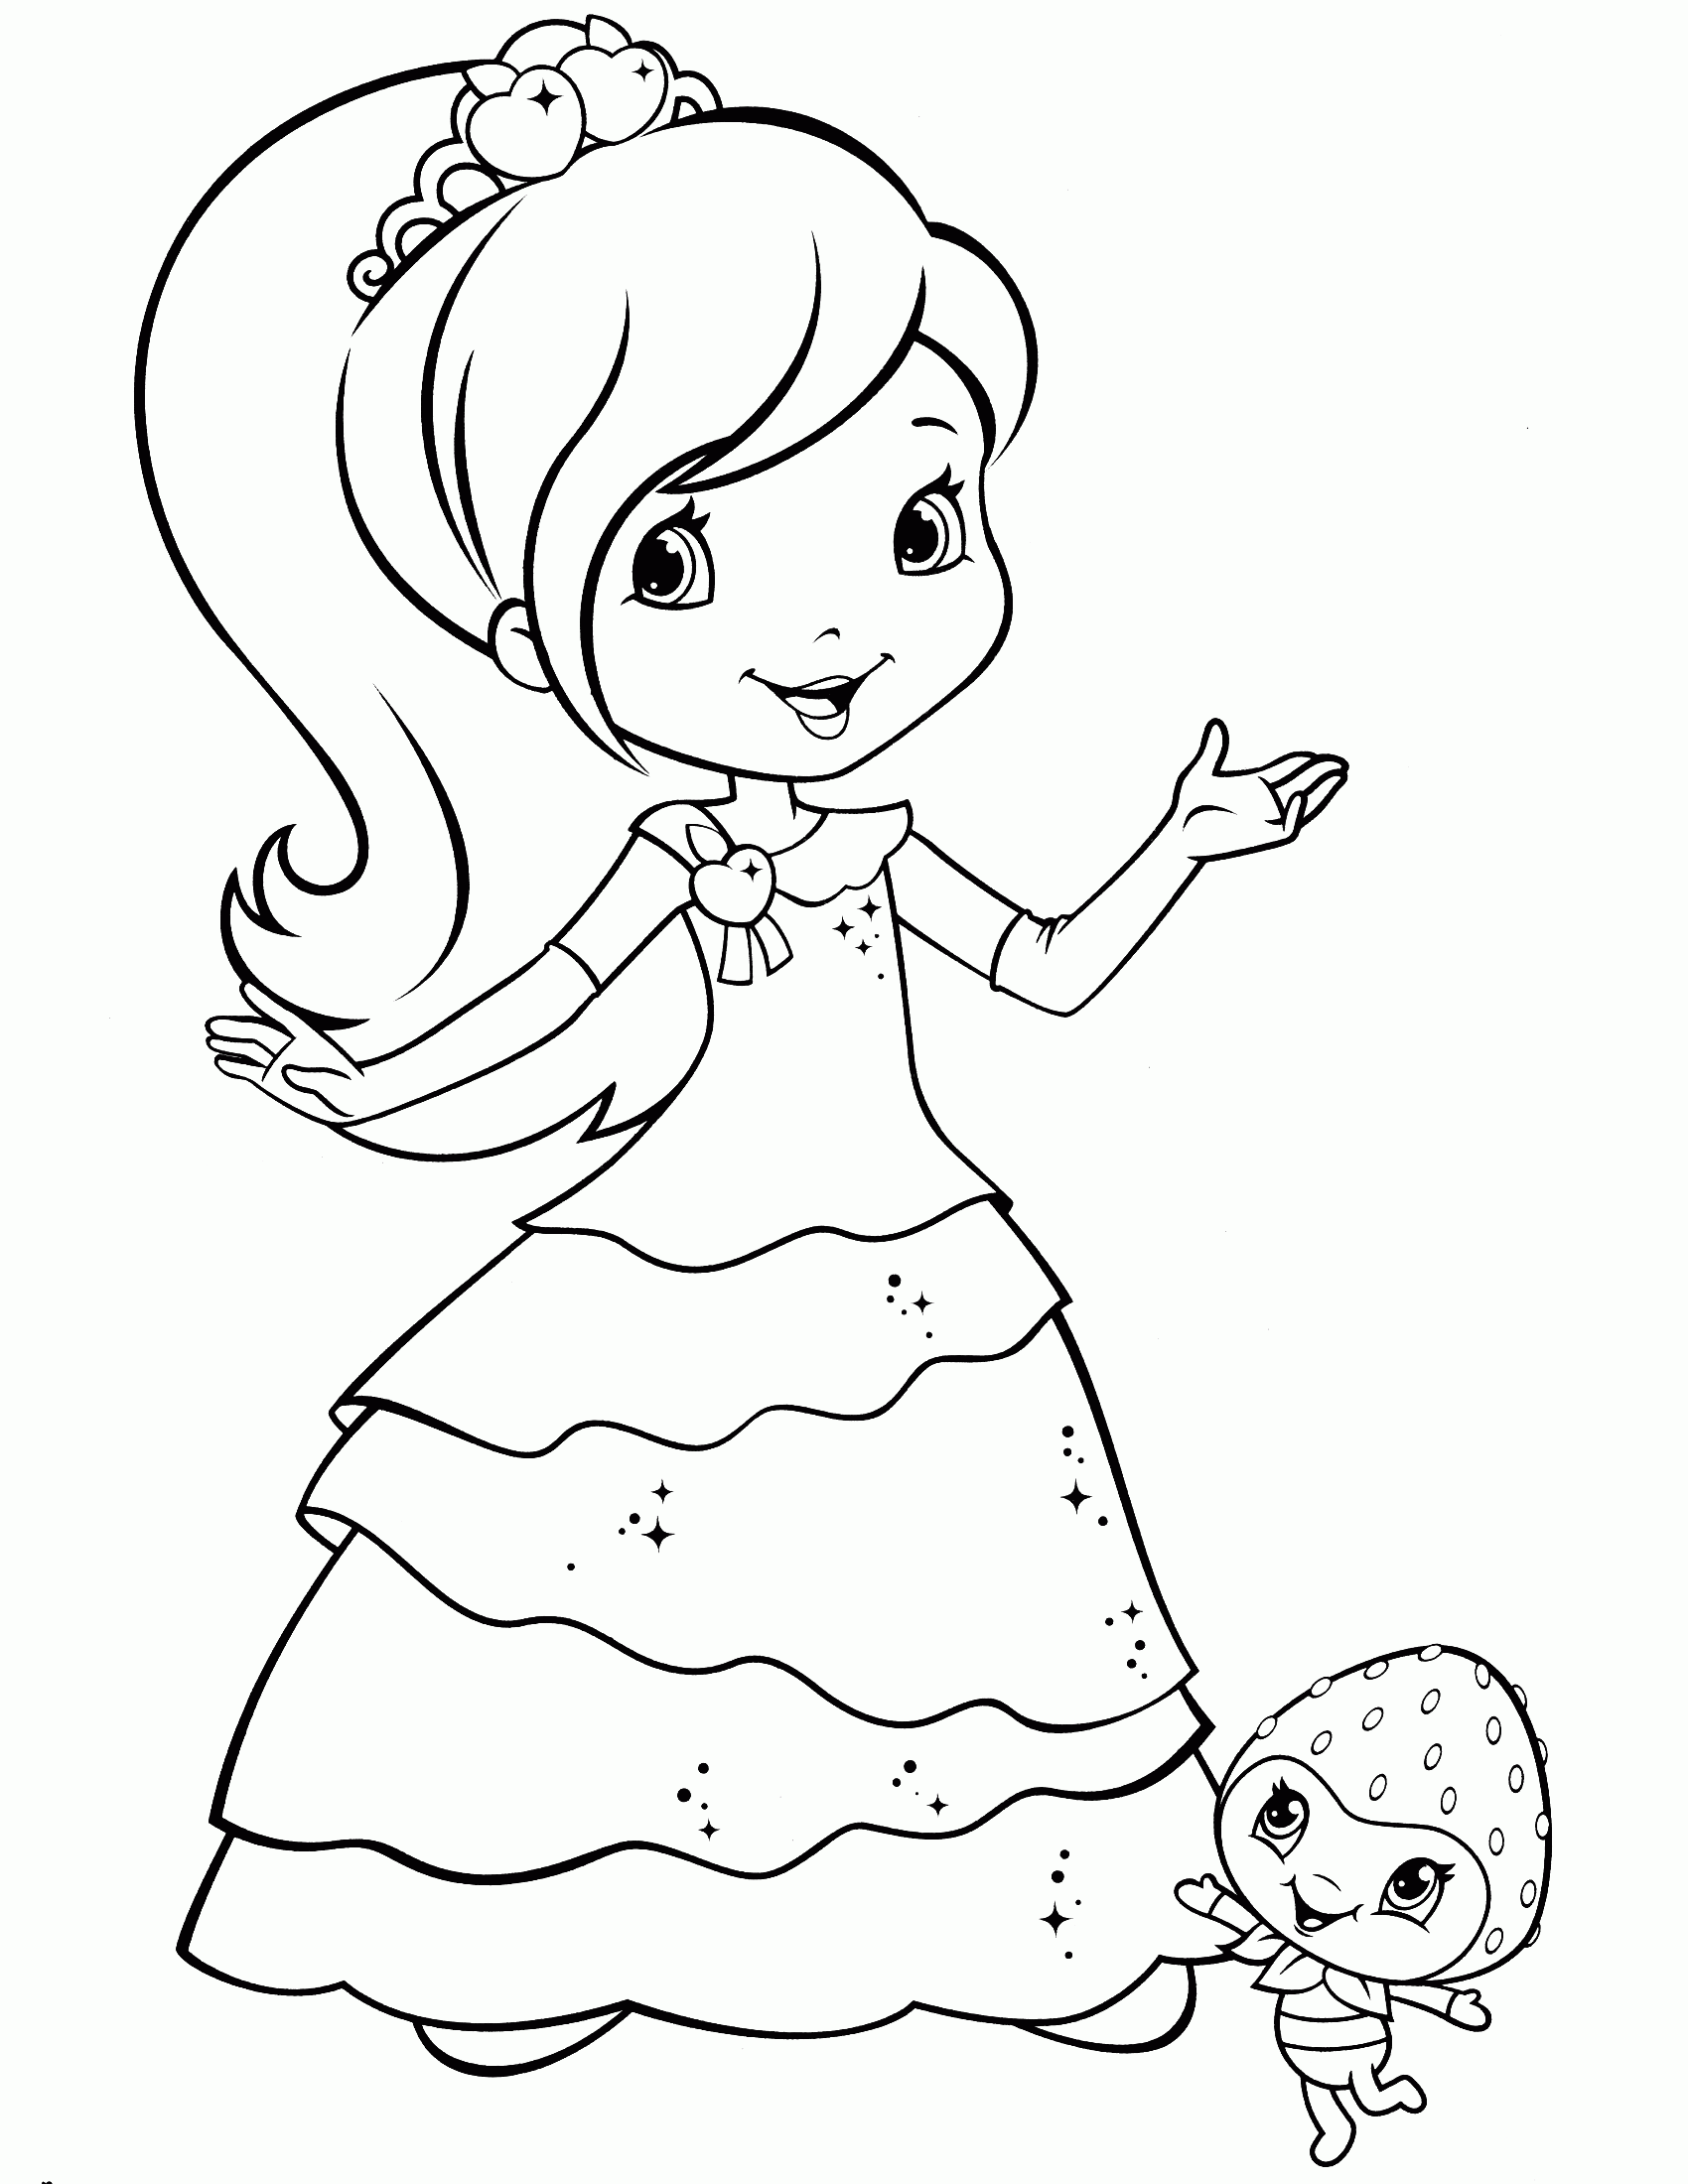 Strawberry Shortcake Coloring Pages Pdf   Coloring Pages ...